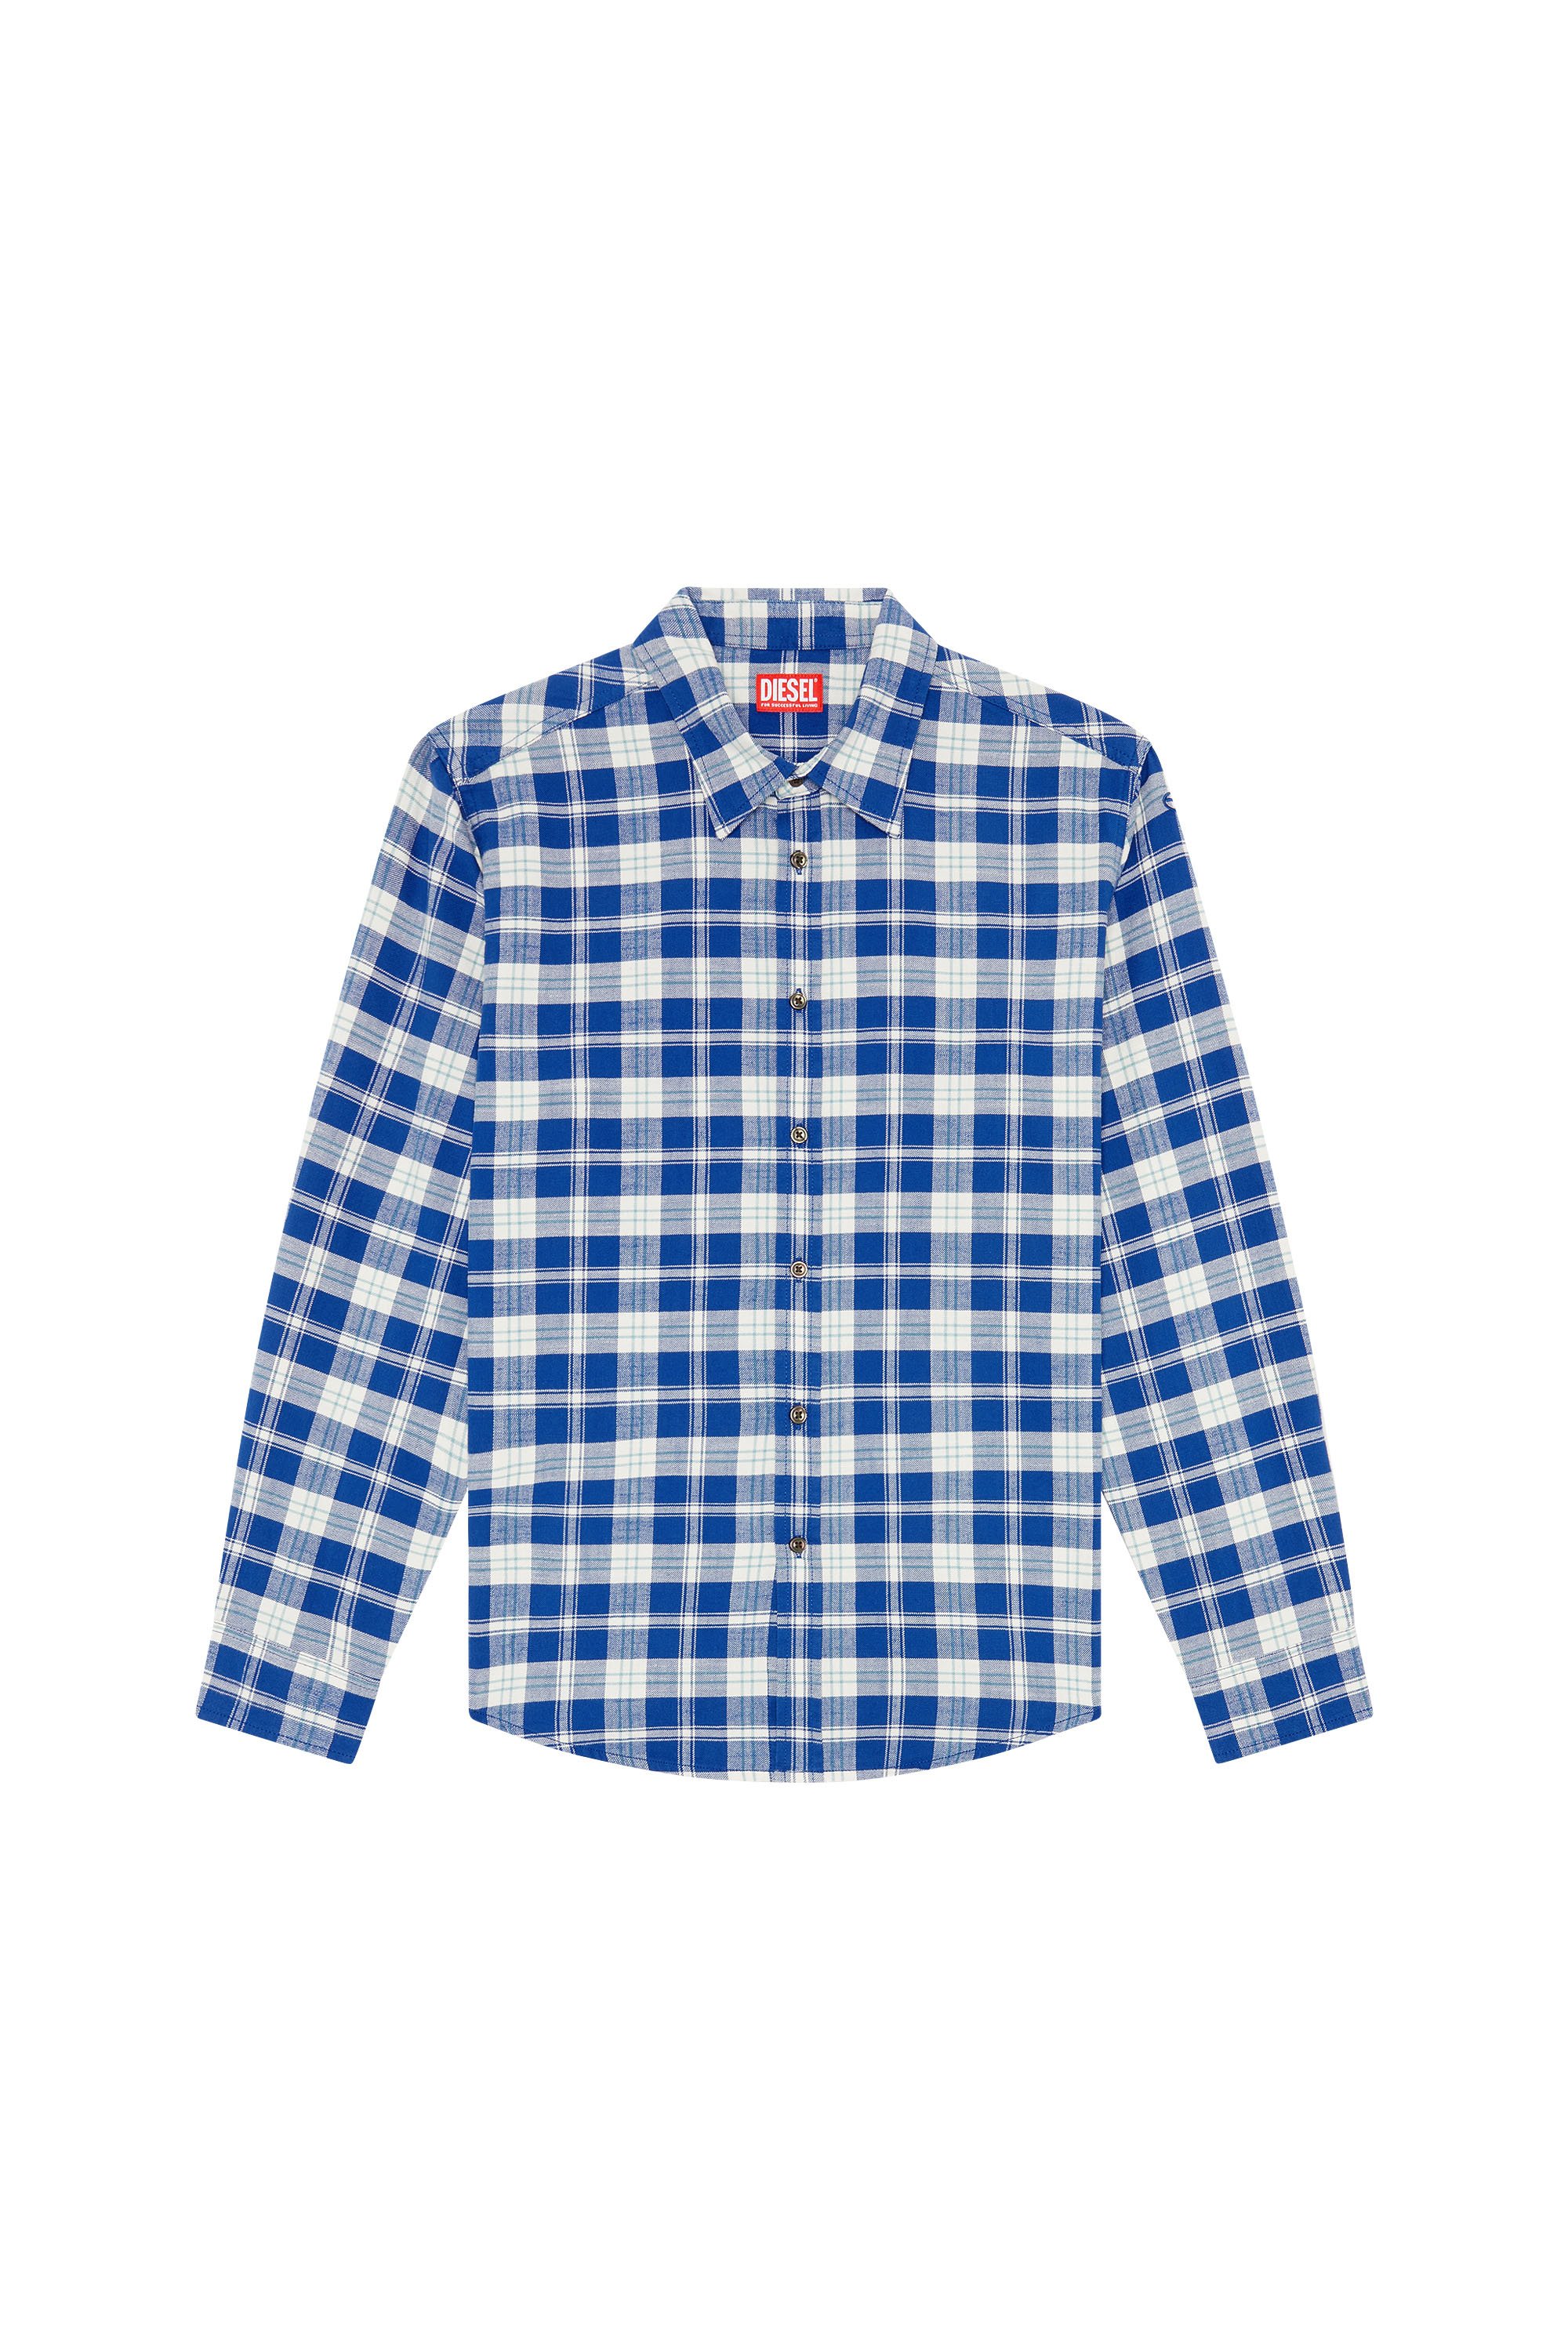 Diesel - S-UMBE-CHECK-NW, Homme Chemise en flanelle à carreaux in Polychrome - Image 5